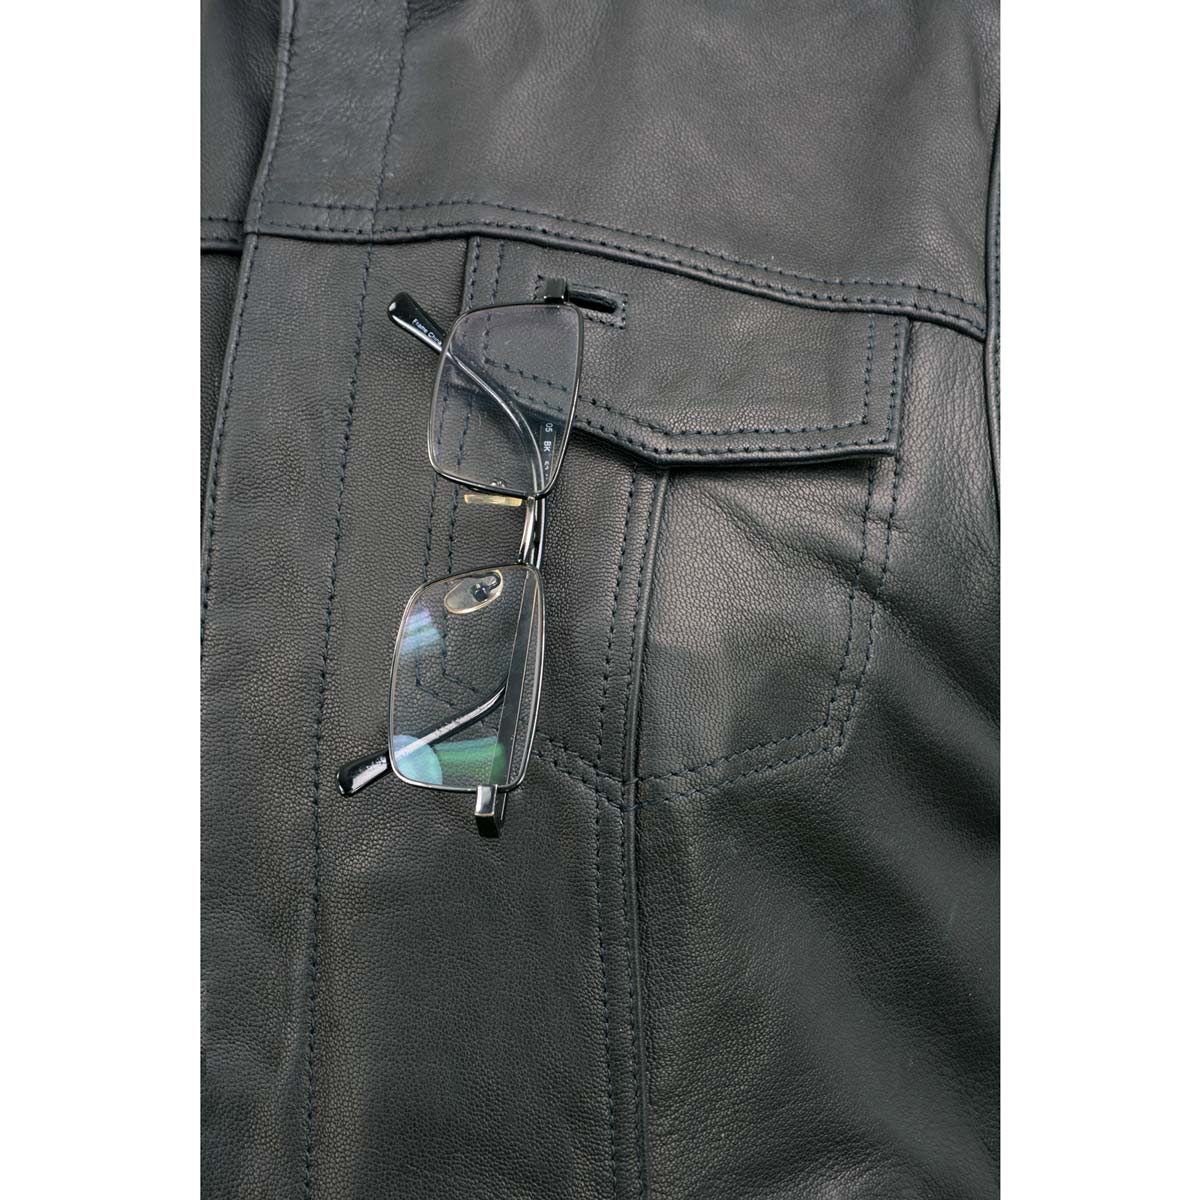 Milwaukee Leather MLL4512 Women’s Black Leather 'Lashes' Club Style Motorcycle Rider Vest W/ Concealed Dual Closure